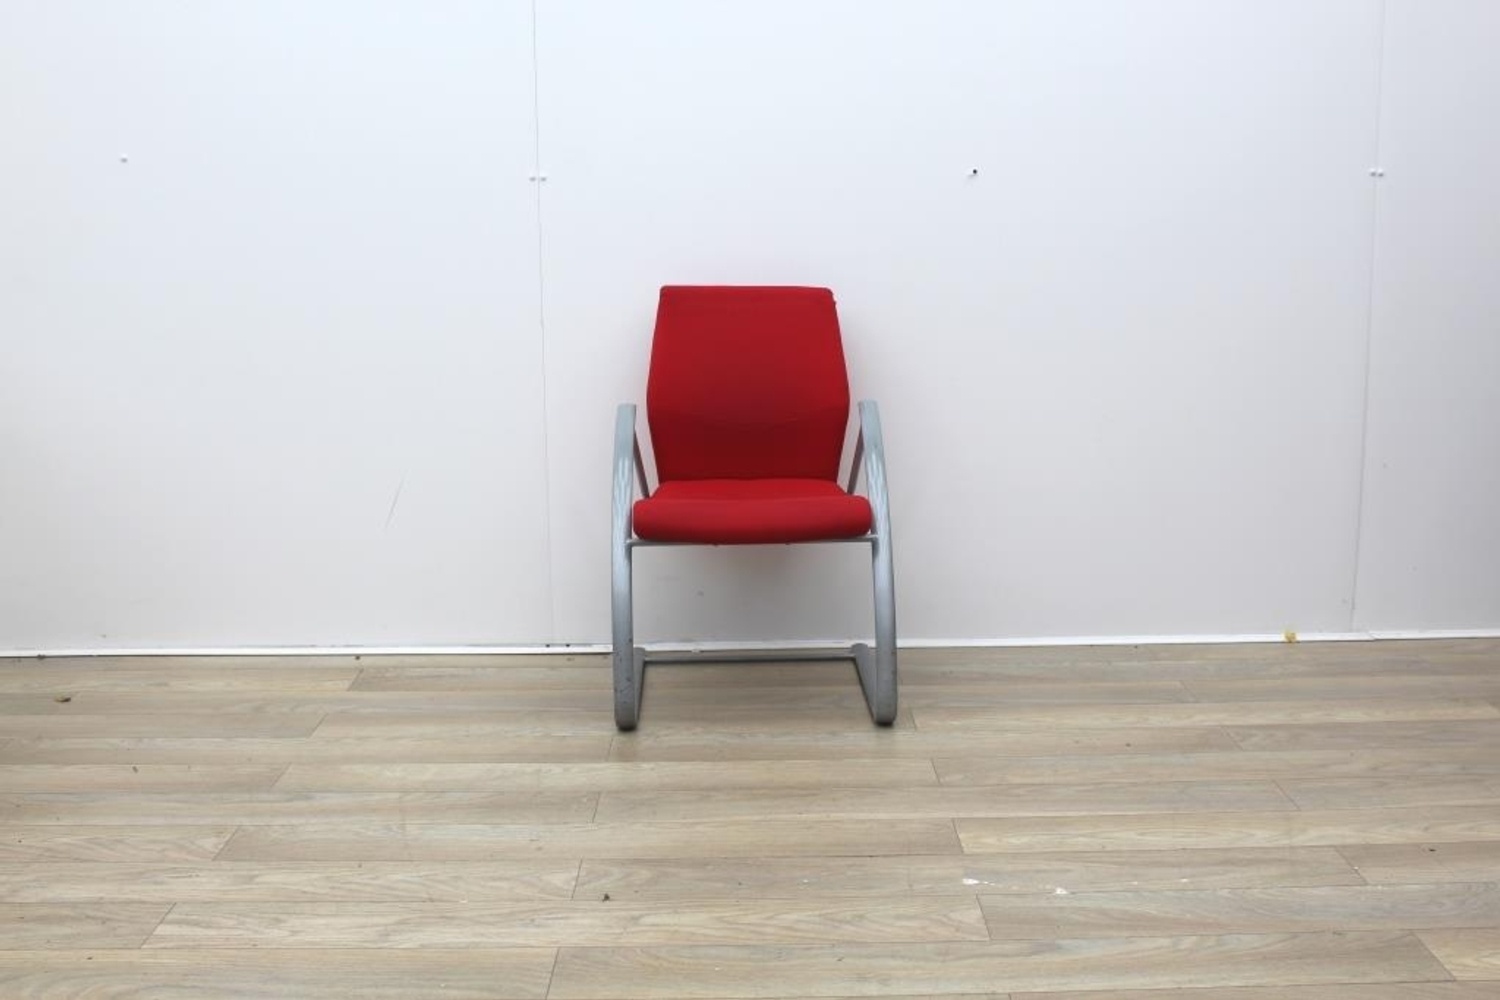 Red second hand chair